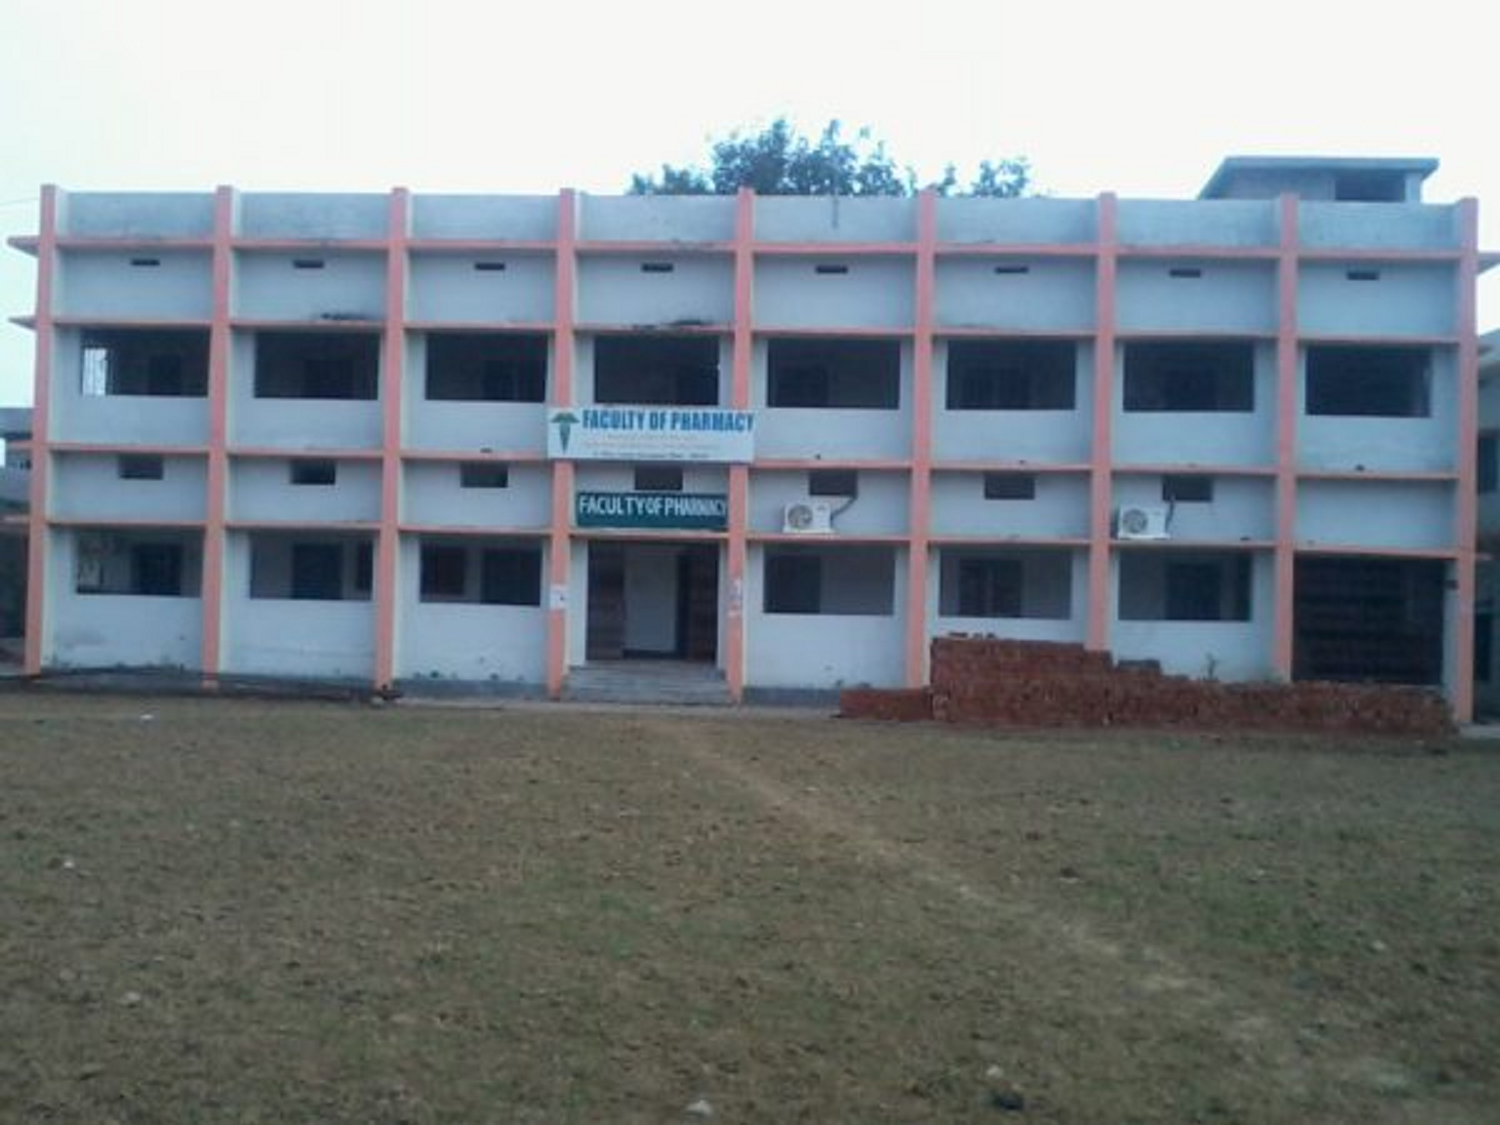 Faculty of Pharmacy Sachchidanand Sinha College